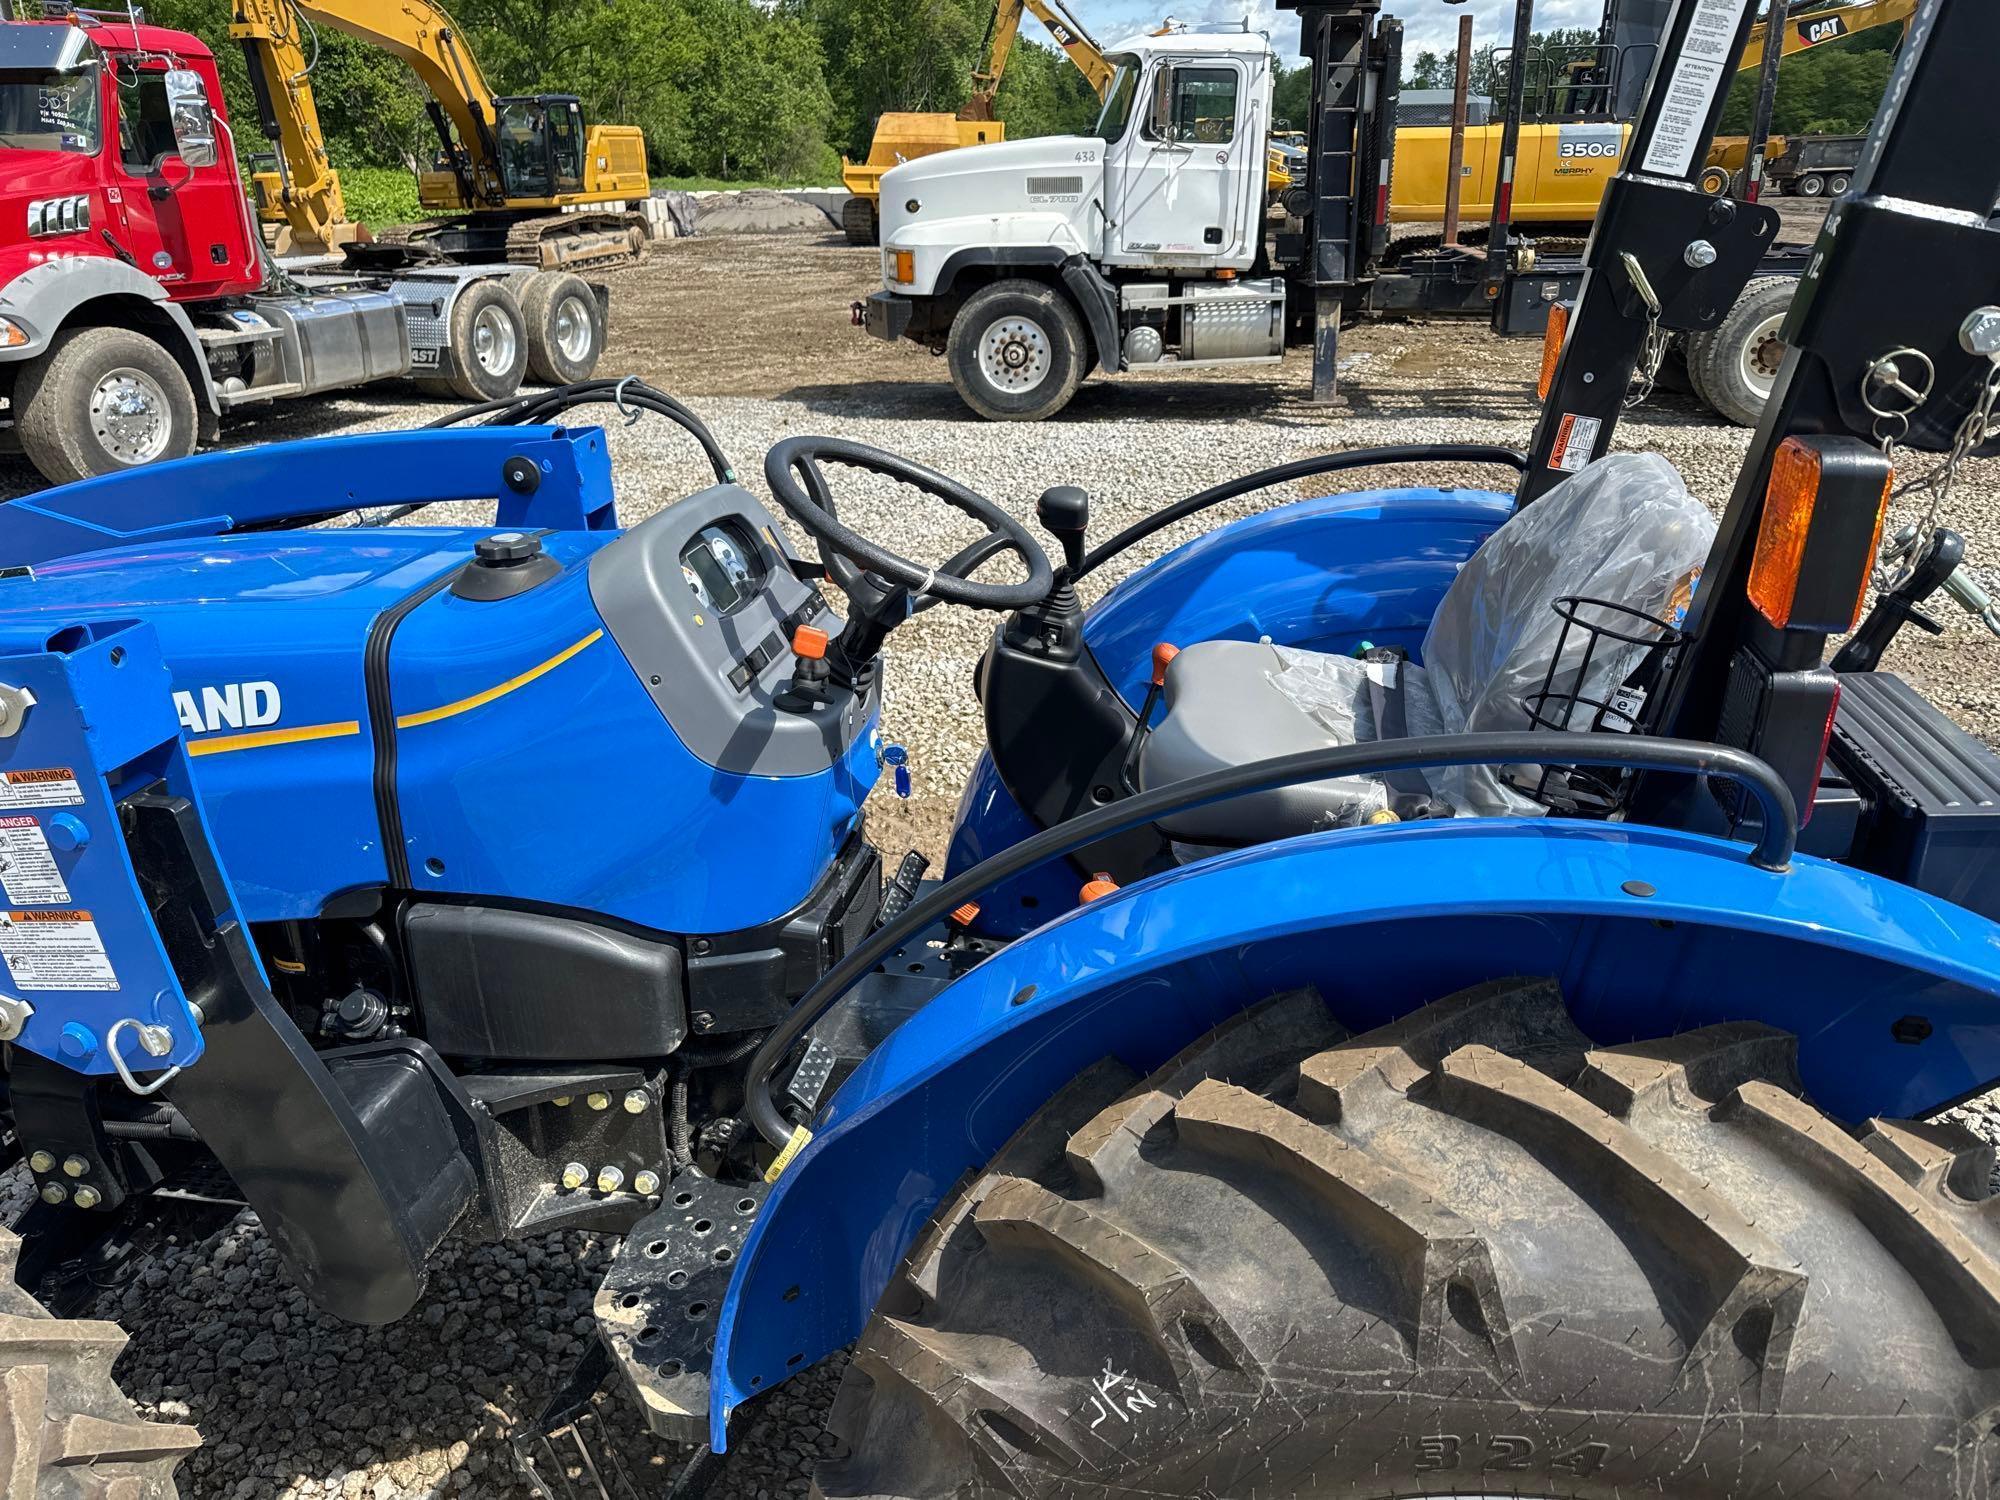 NEW NEW HOLLAND WORKMASTER 70 TRACTOR LOADER SN-650587, 4x4, powered by diesel engine, equipped with